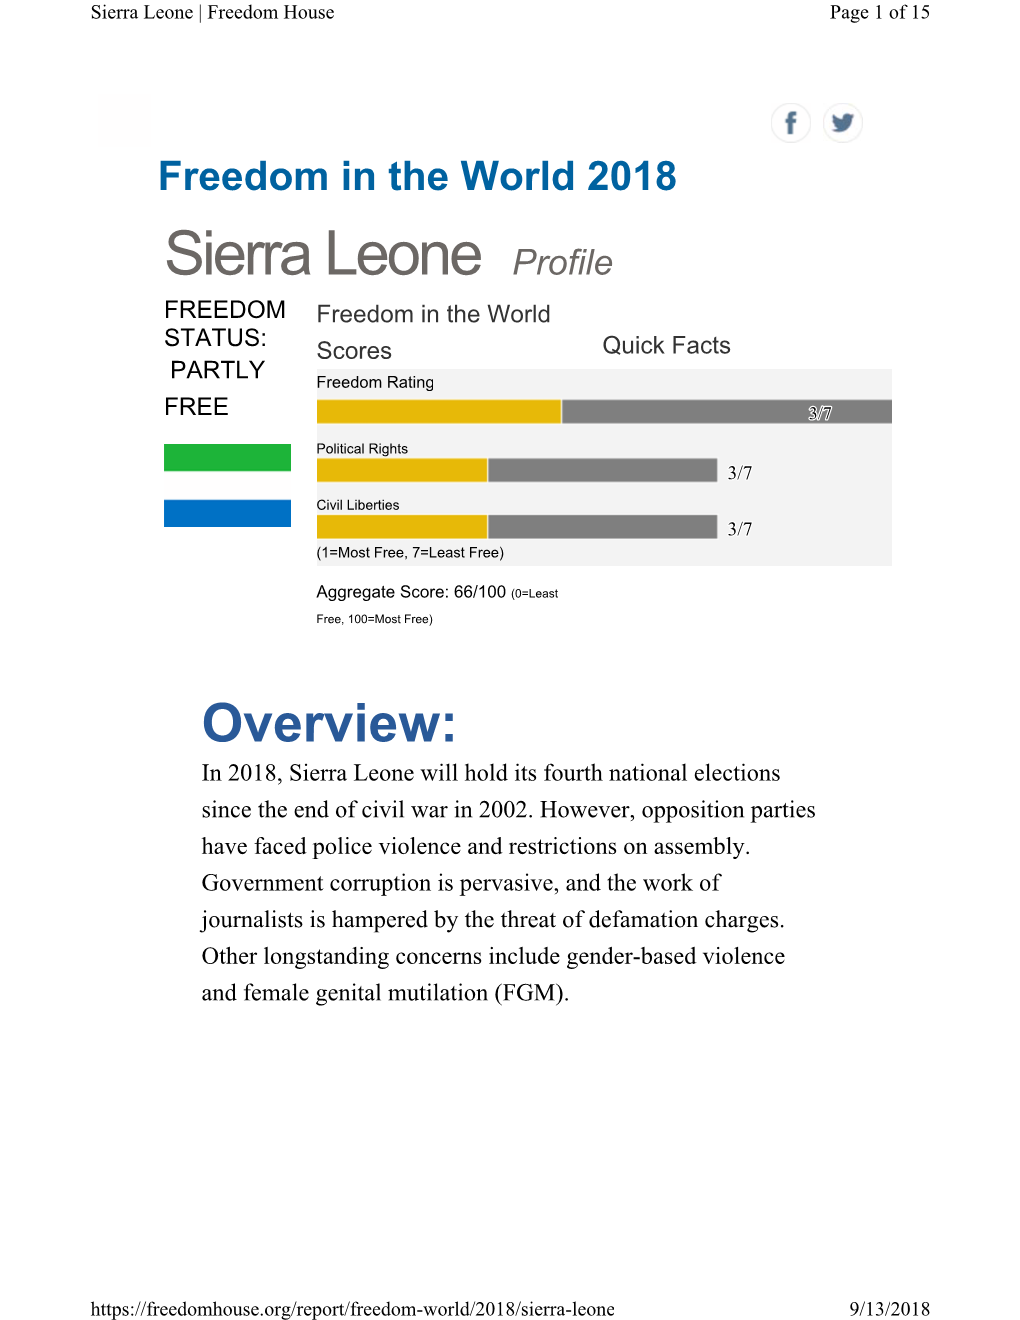 Sierra Leone Profile FREEDOM Freedom in the World STATUS: Scores Quick Facts PARTLY Freedom Rating FREE 3/7